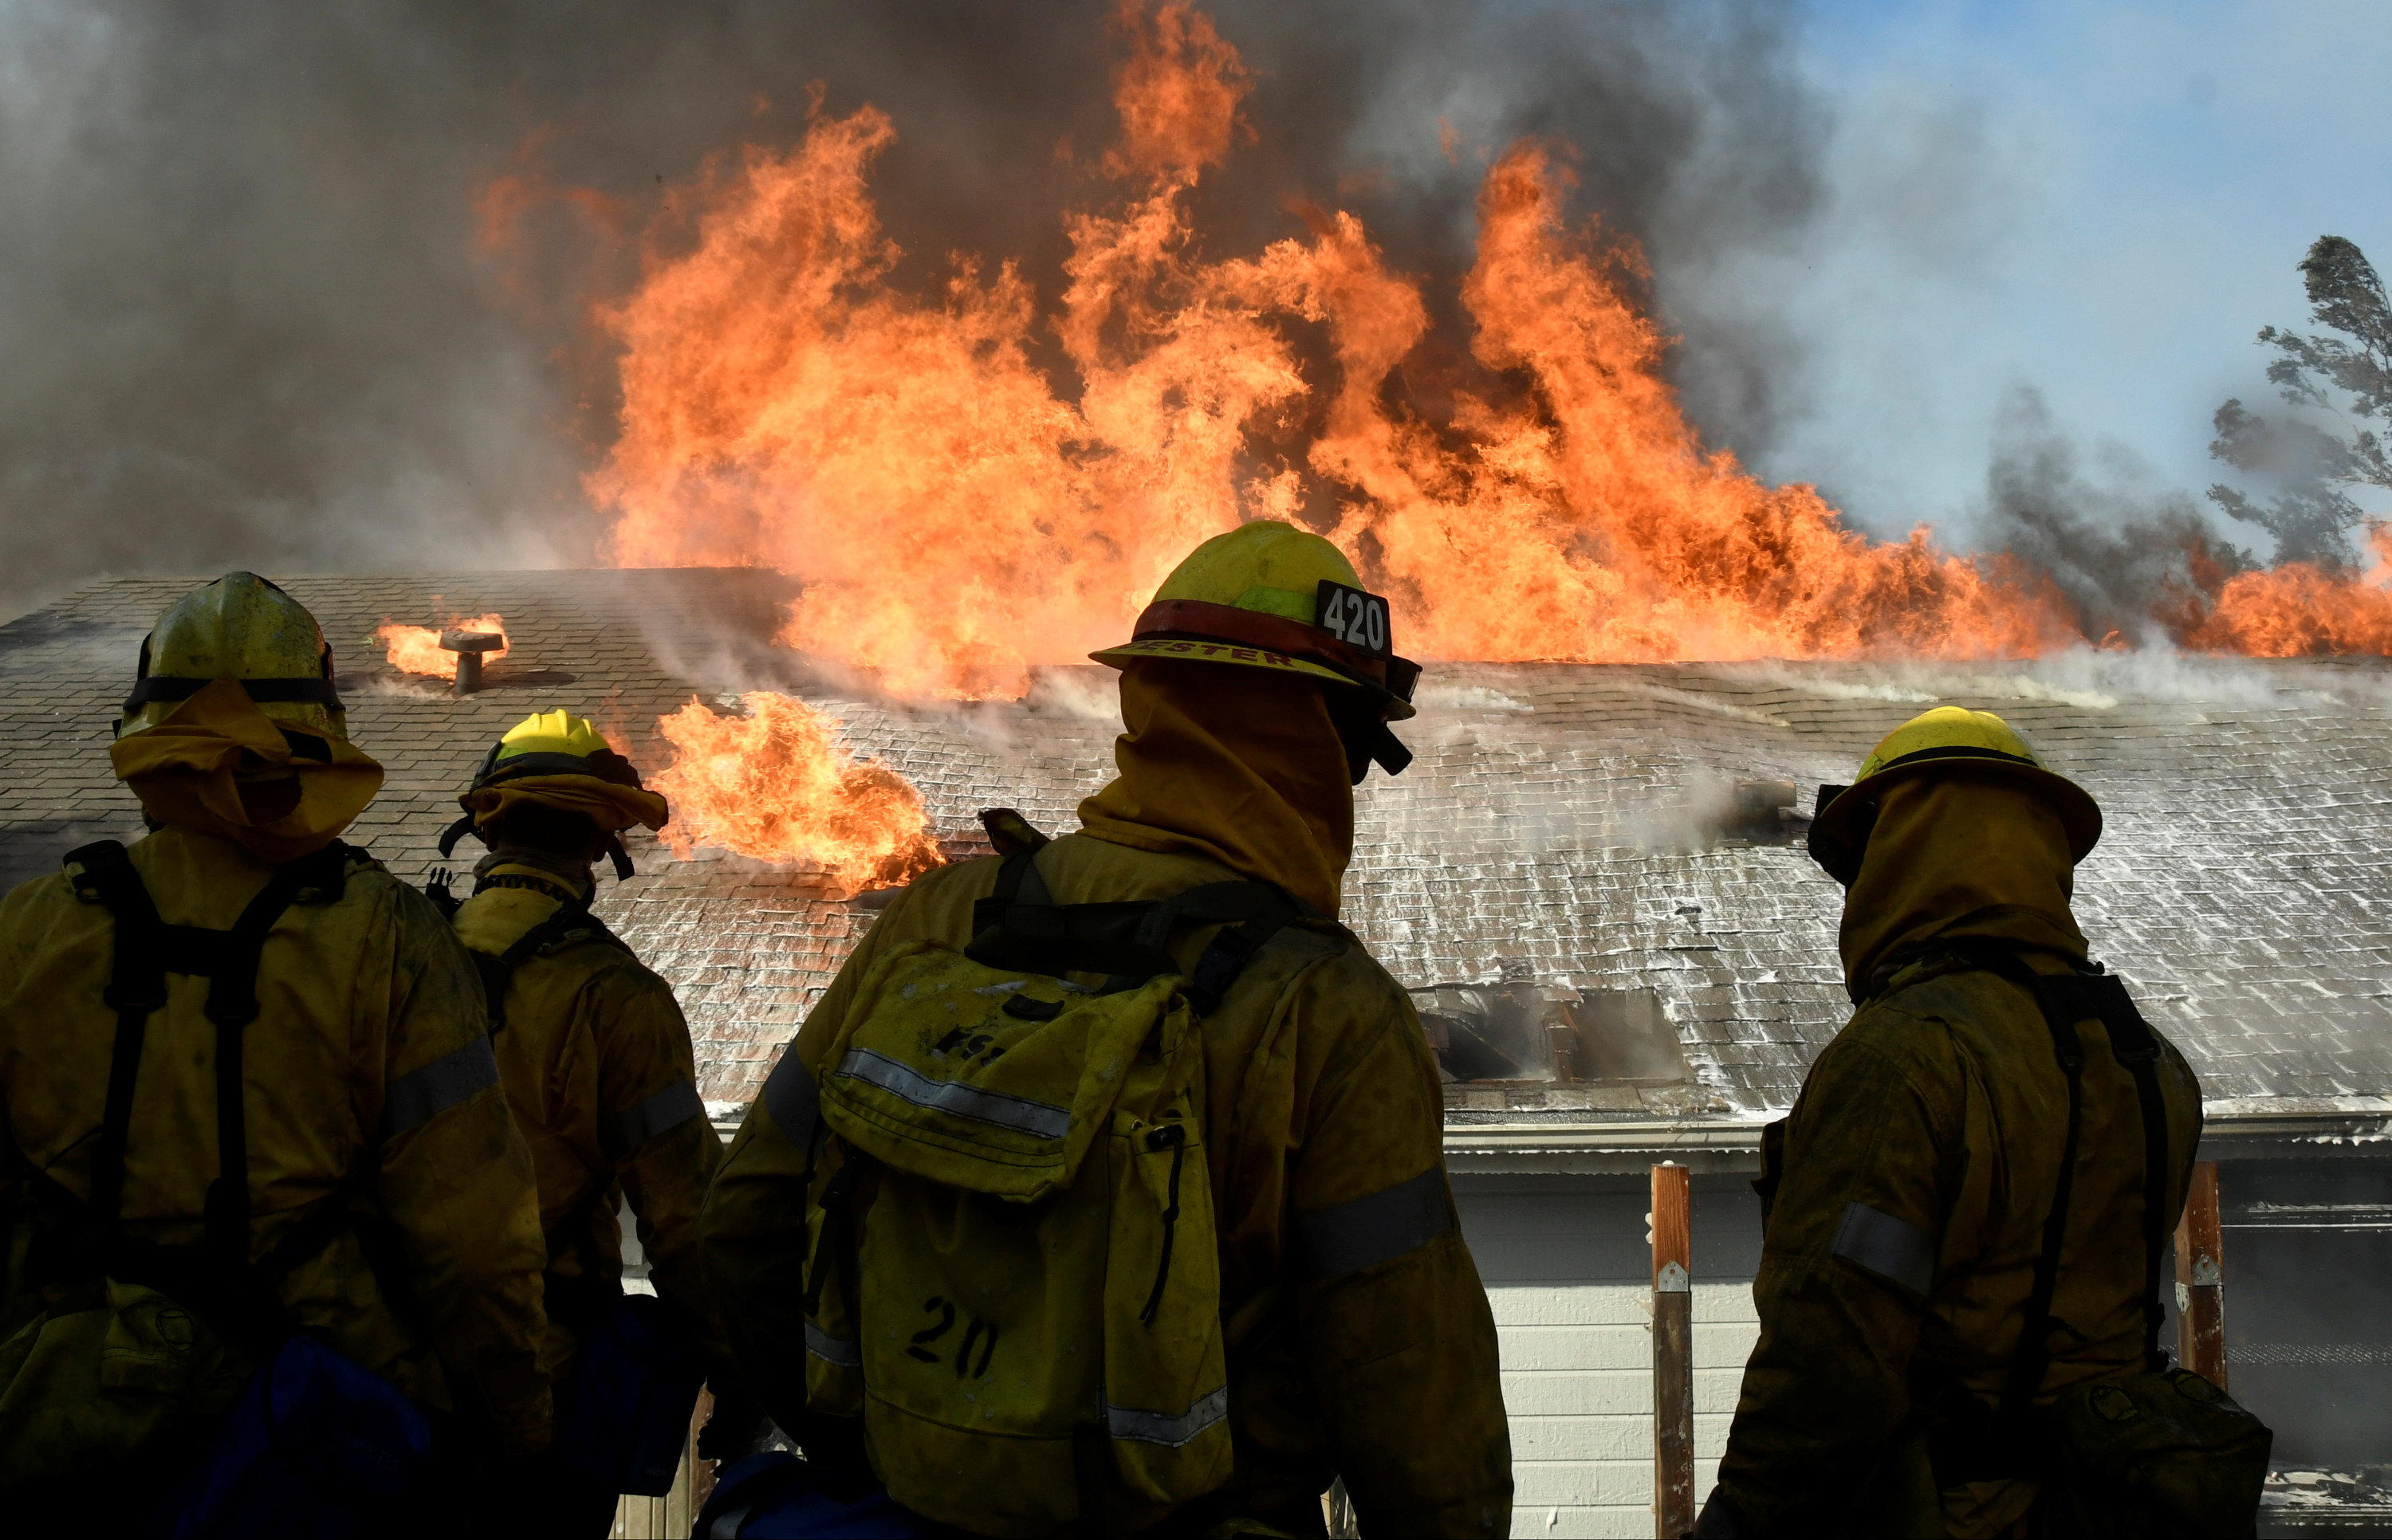 In pictures: California wildfire threatens thousands of homes